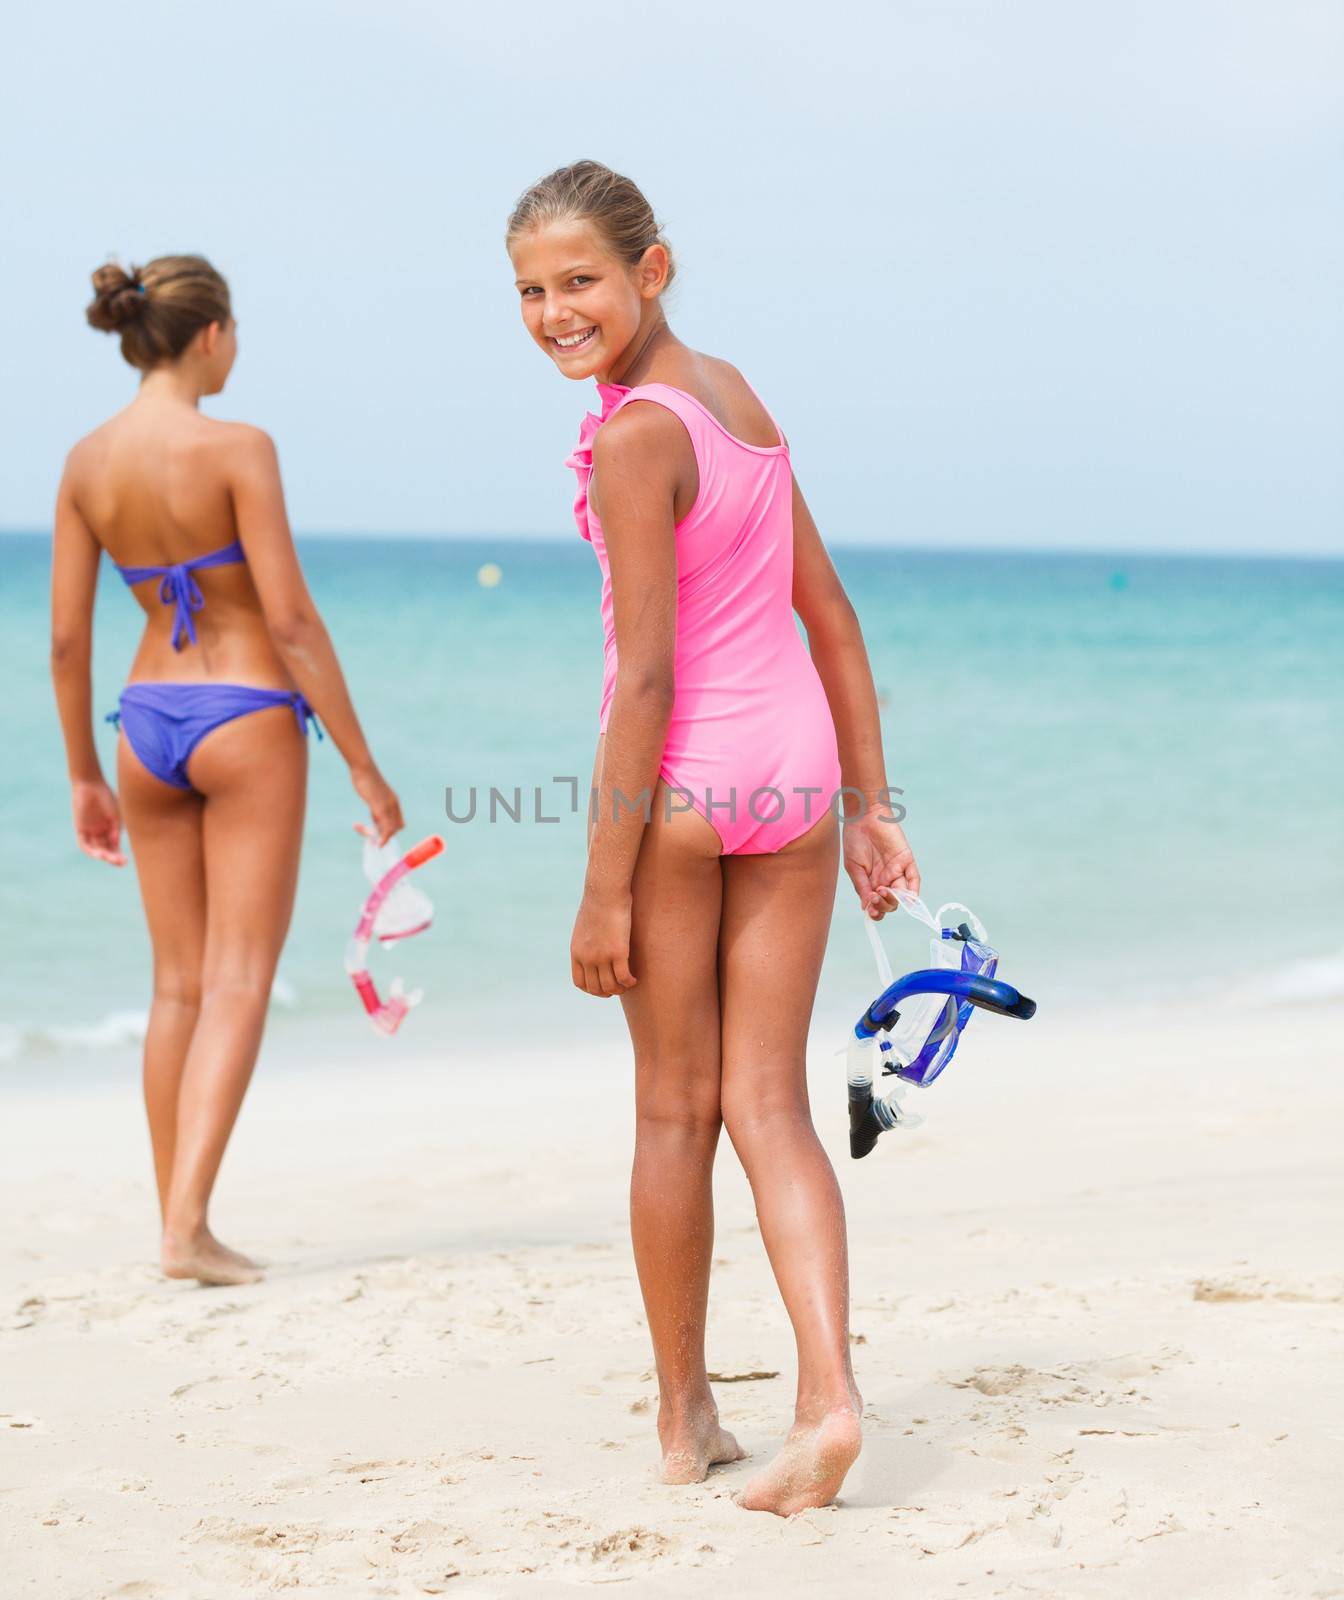 Back view of two happy girls on beach with colorful face masks and snorkels, sea in background. Vertical view.